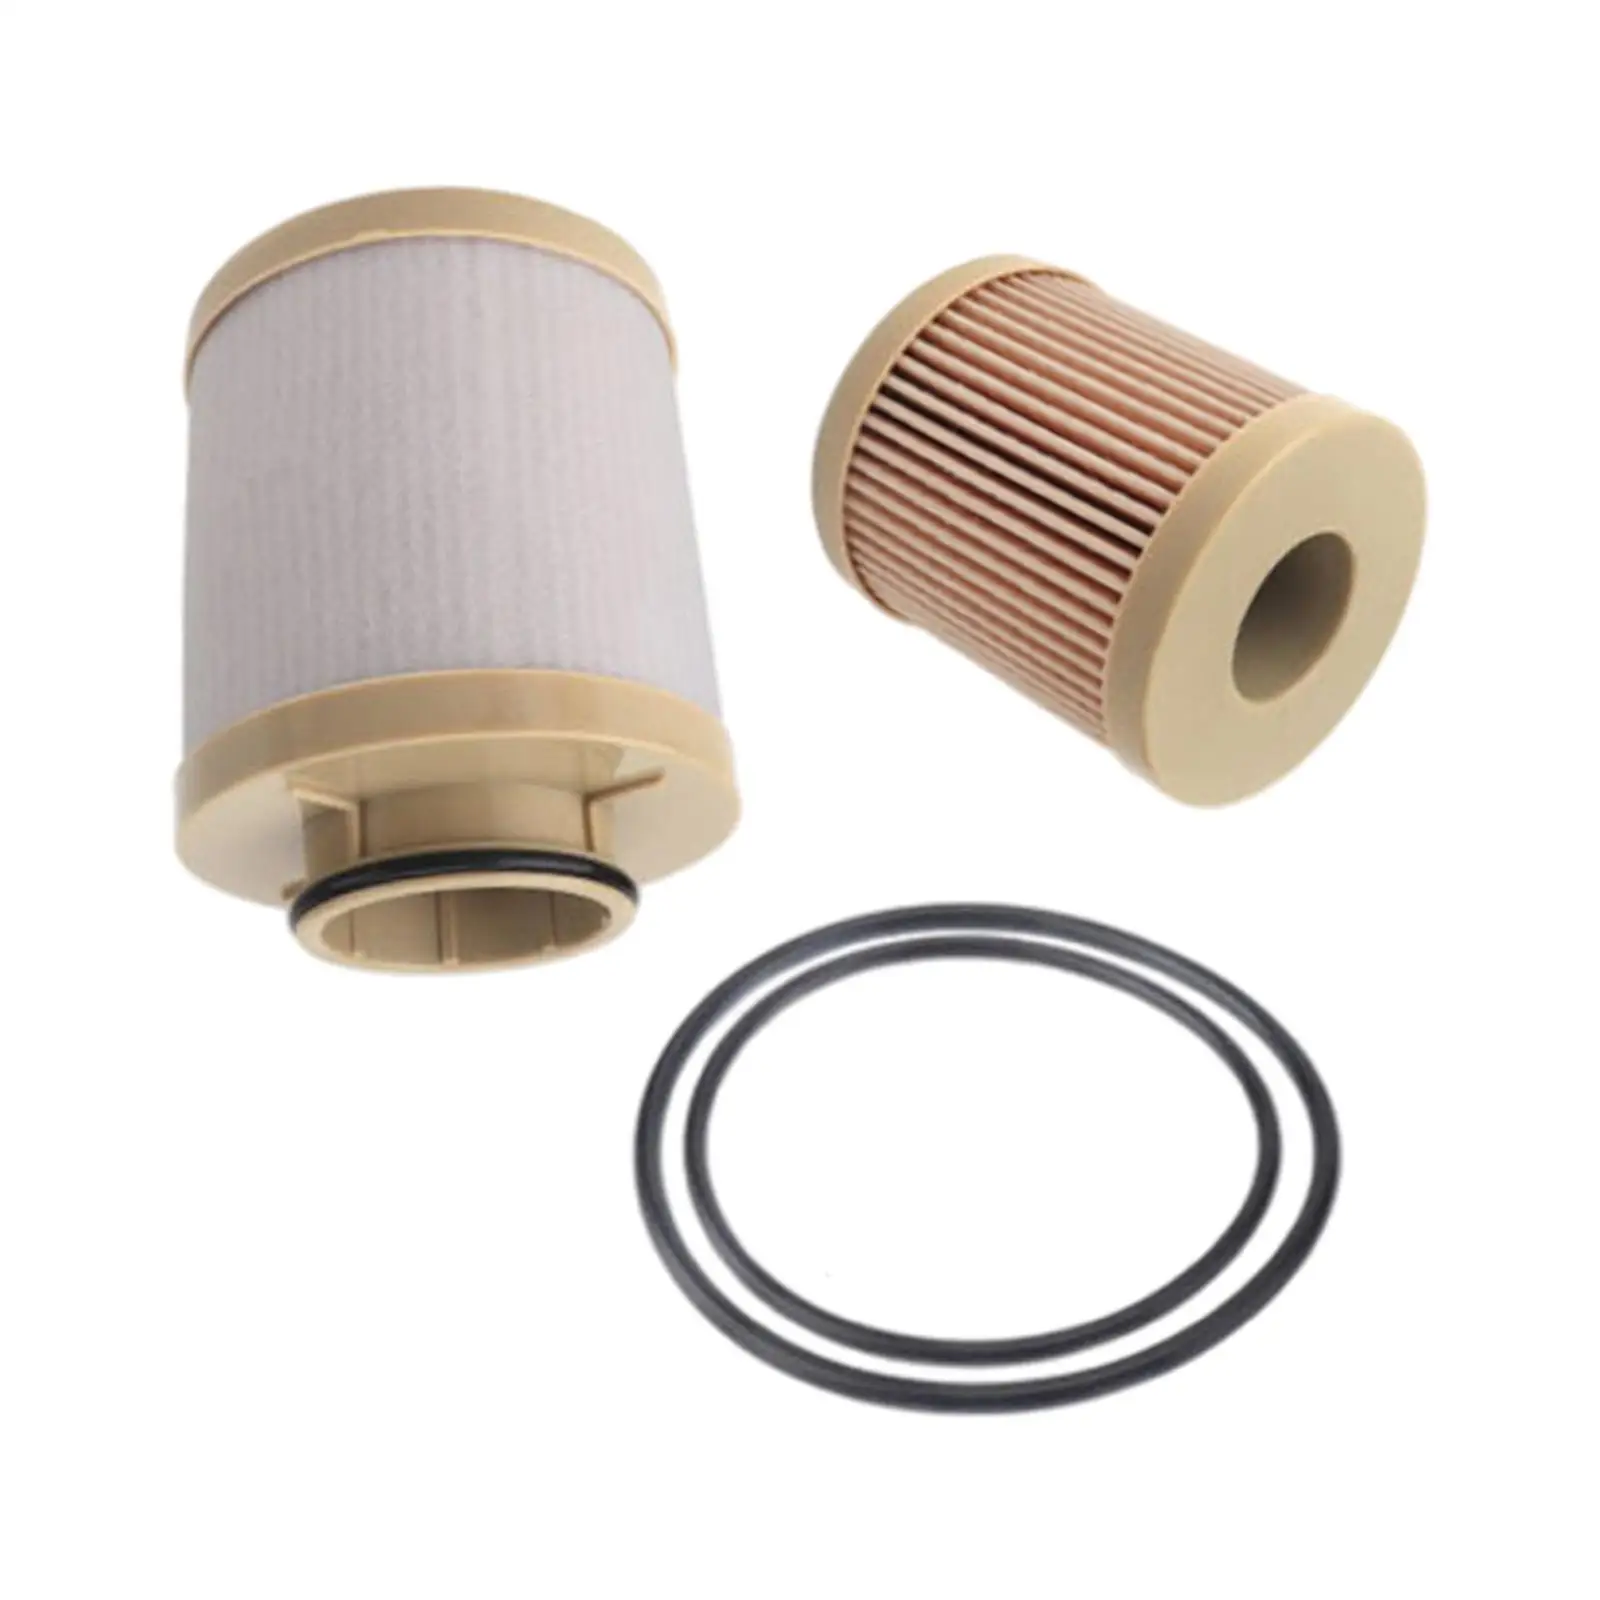 Fuel Filters  for  f550?? Truck 2008-2010  Replacement